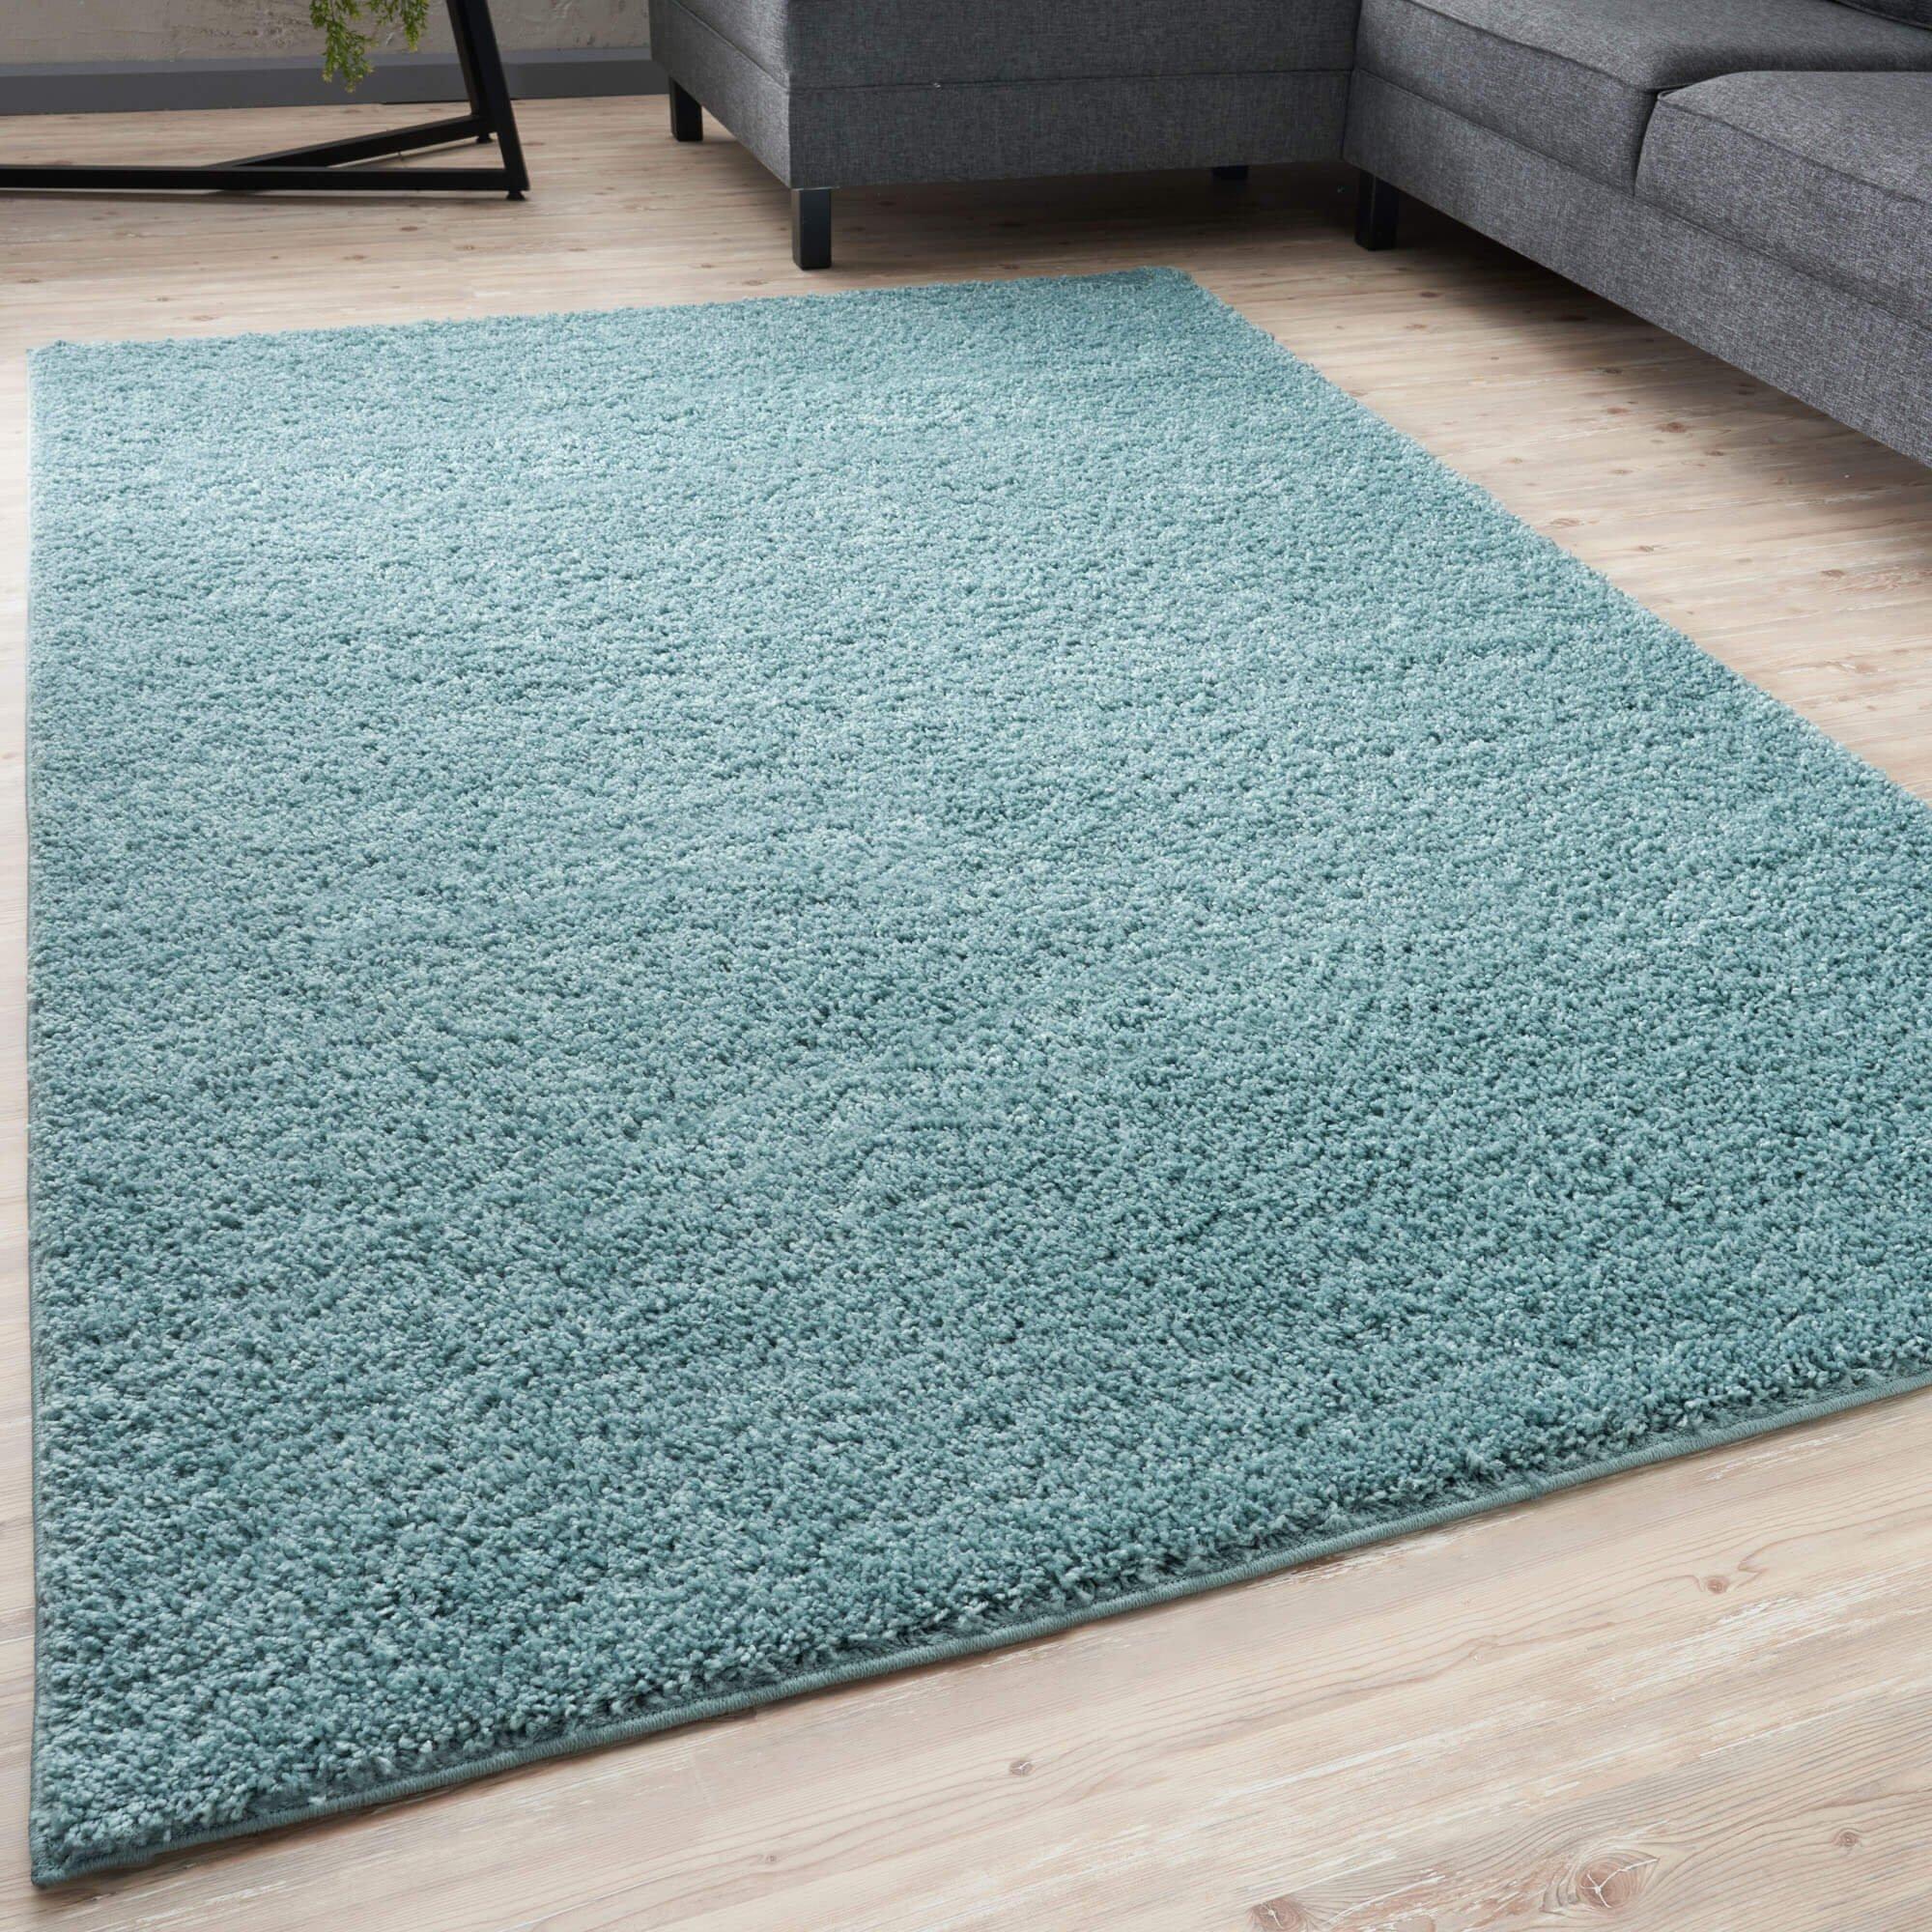 Myshaggy Collection Rugs Solid Design in Duck Egg Blue